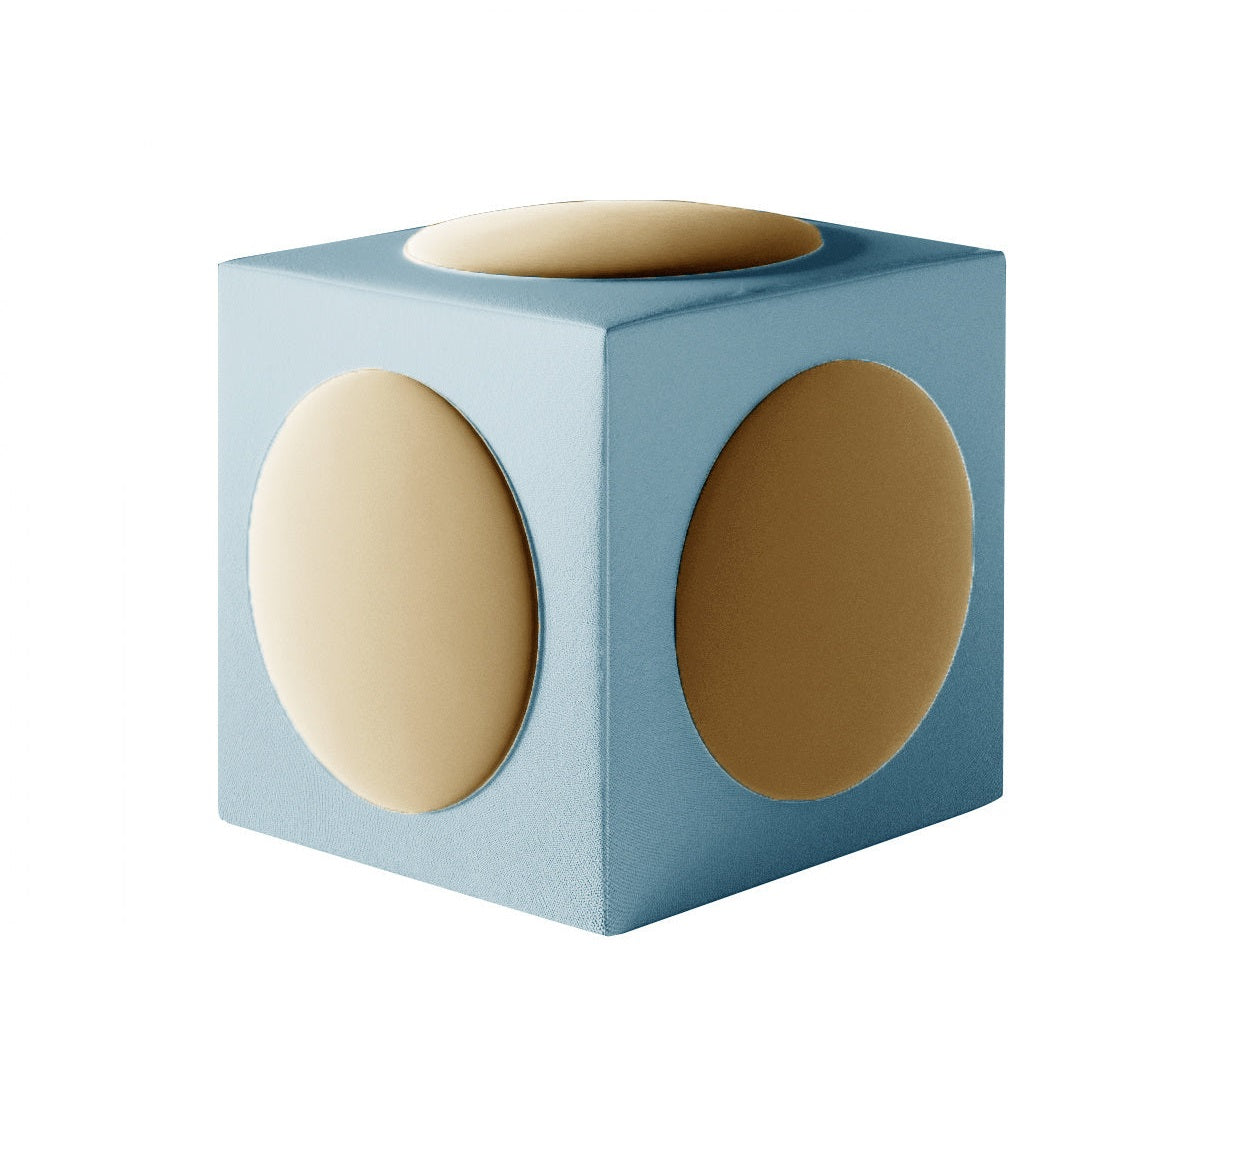 CACKO pouffe yellow with blue